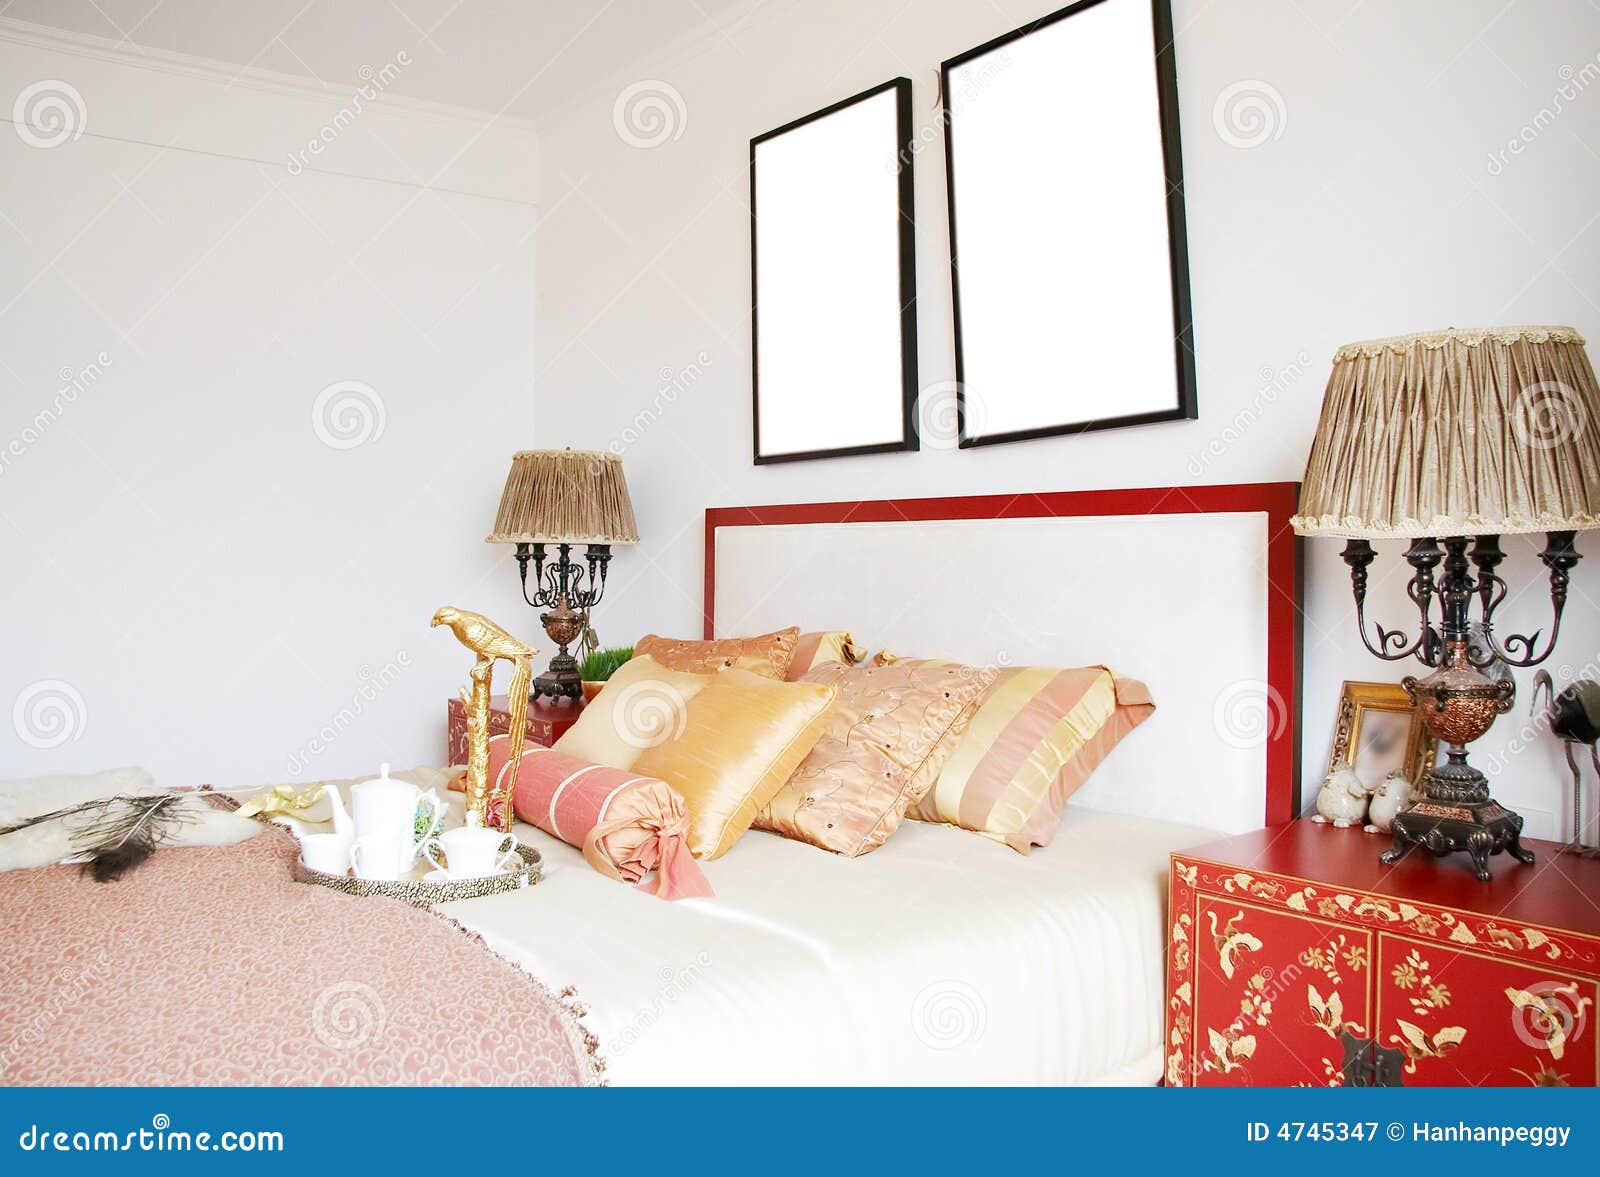 324 Traditional Chinese Bedroom Photos - Free & Royalty-Free ...